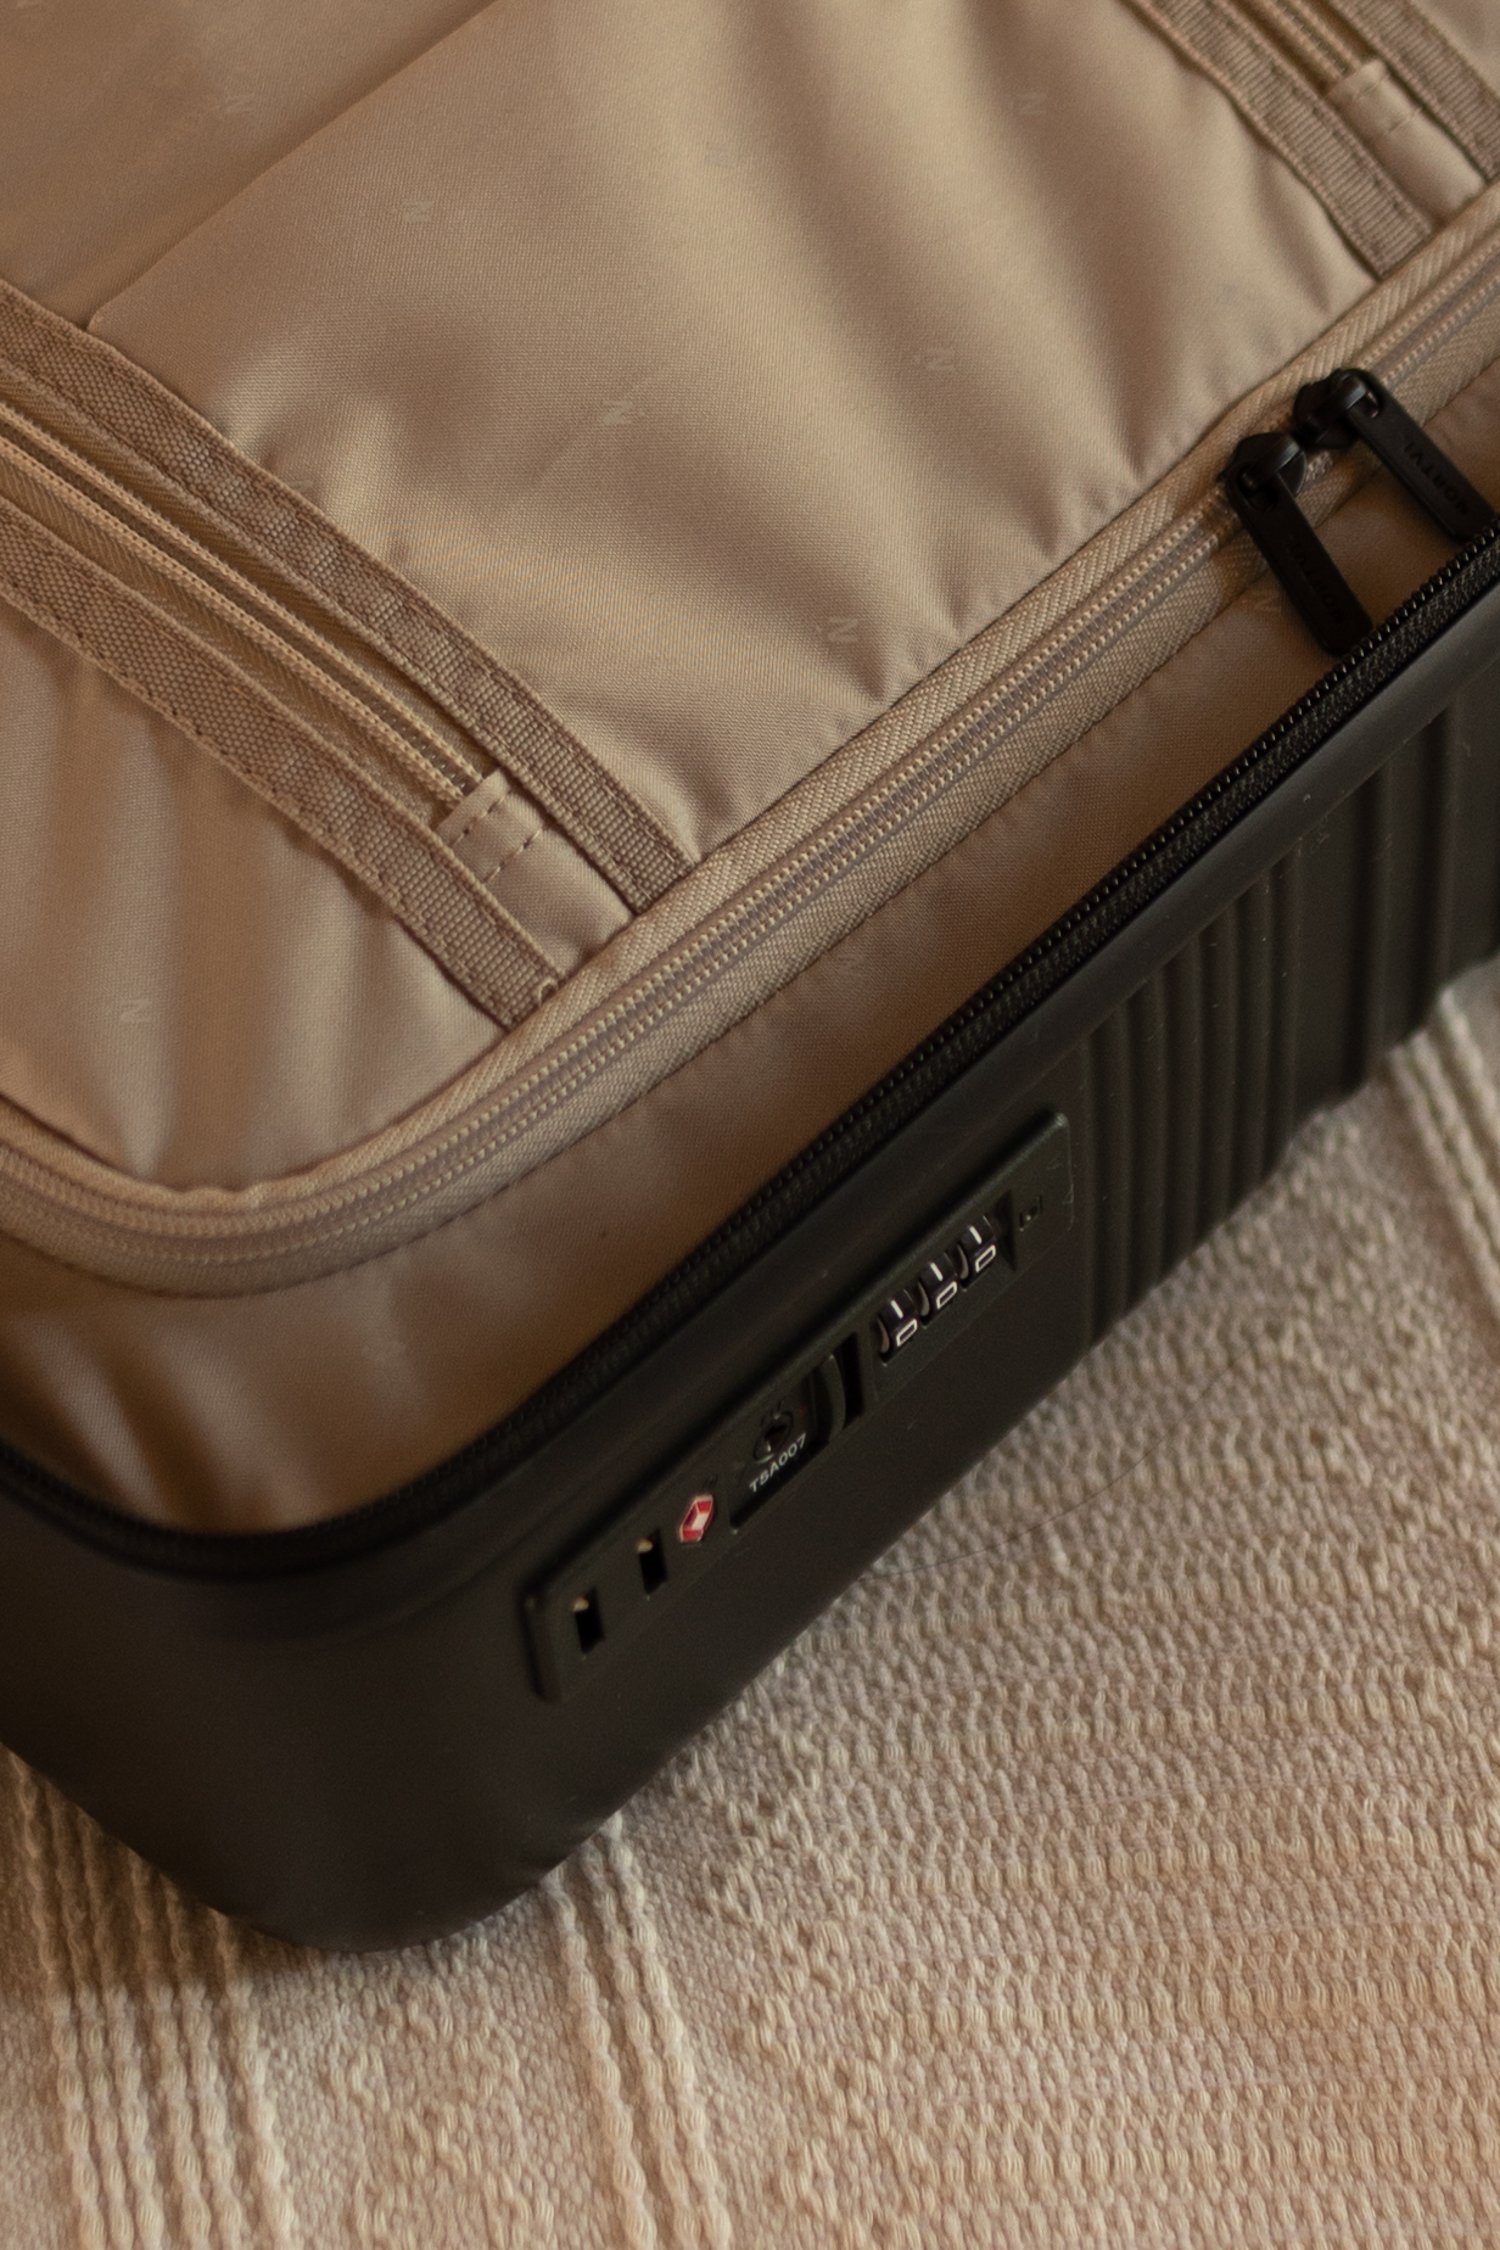 NORTVI, a sustainable suitcase brand from Amsterdam-23.jpg